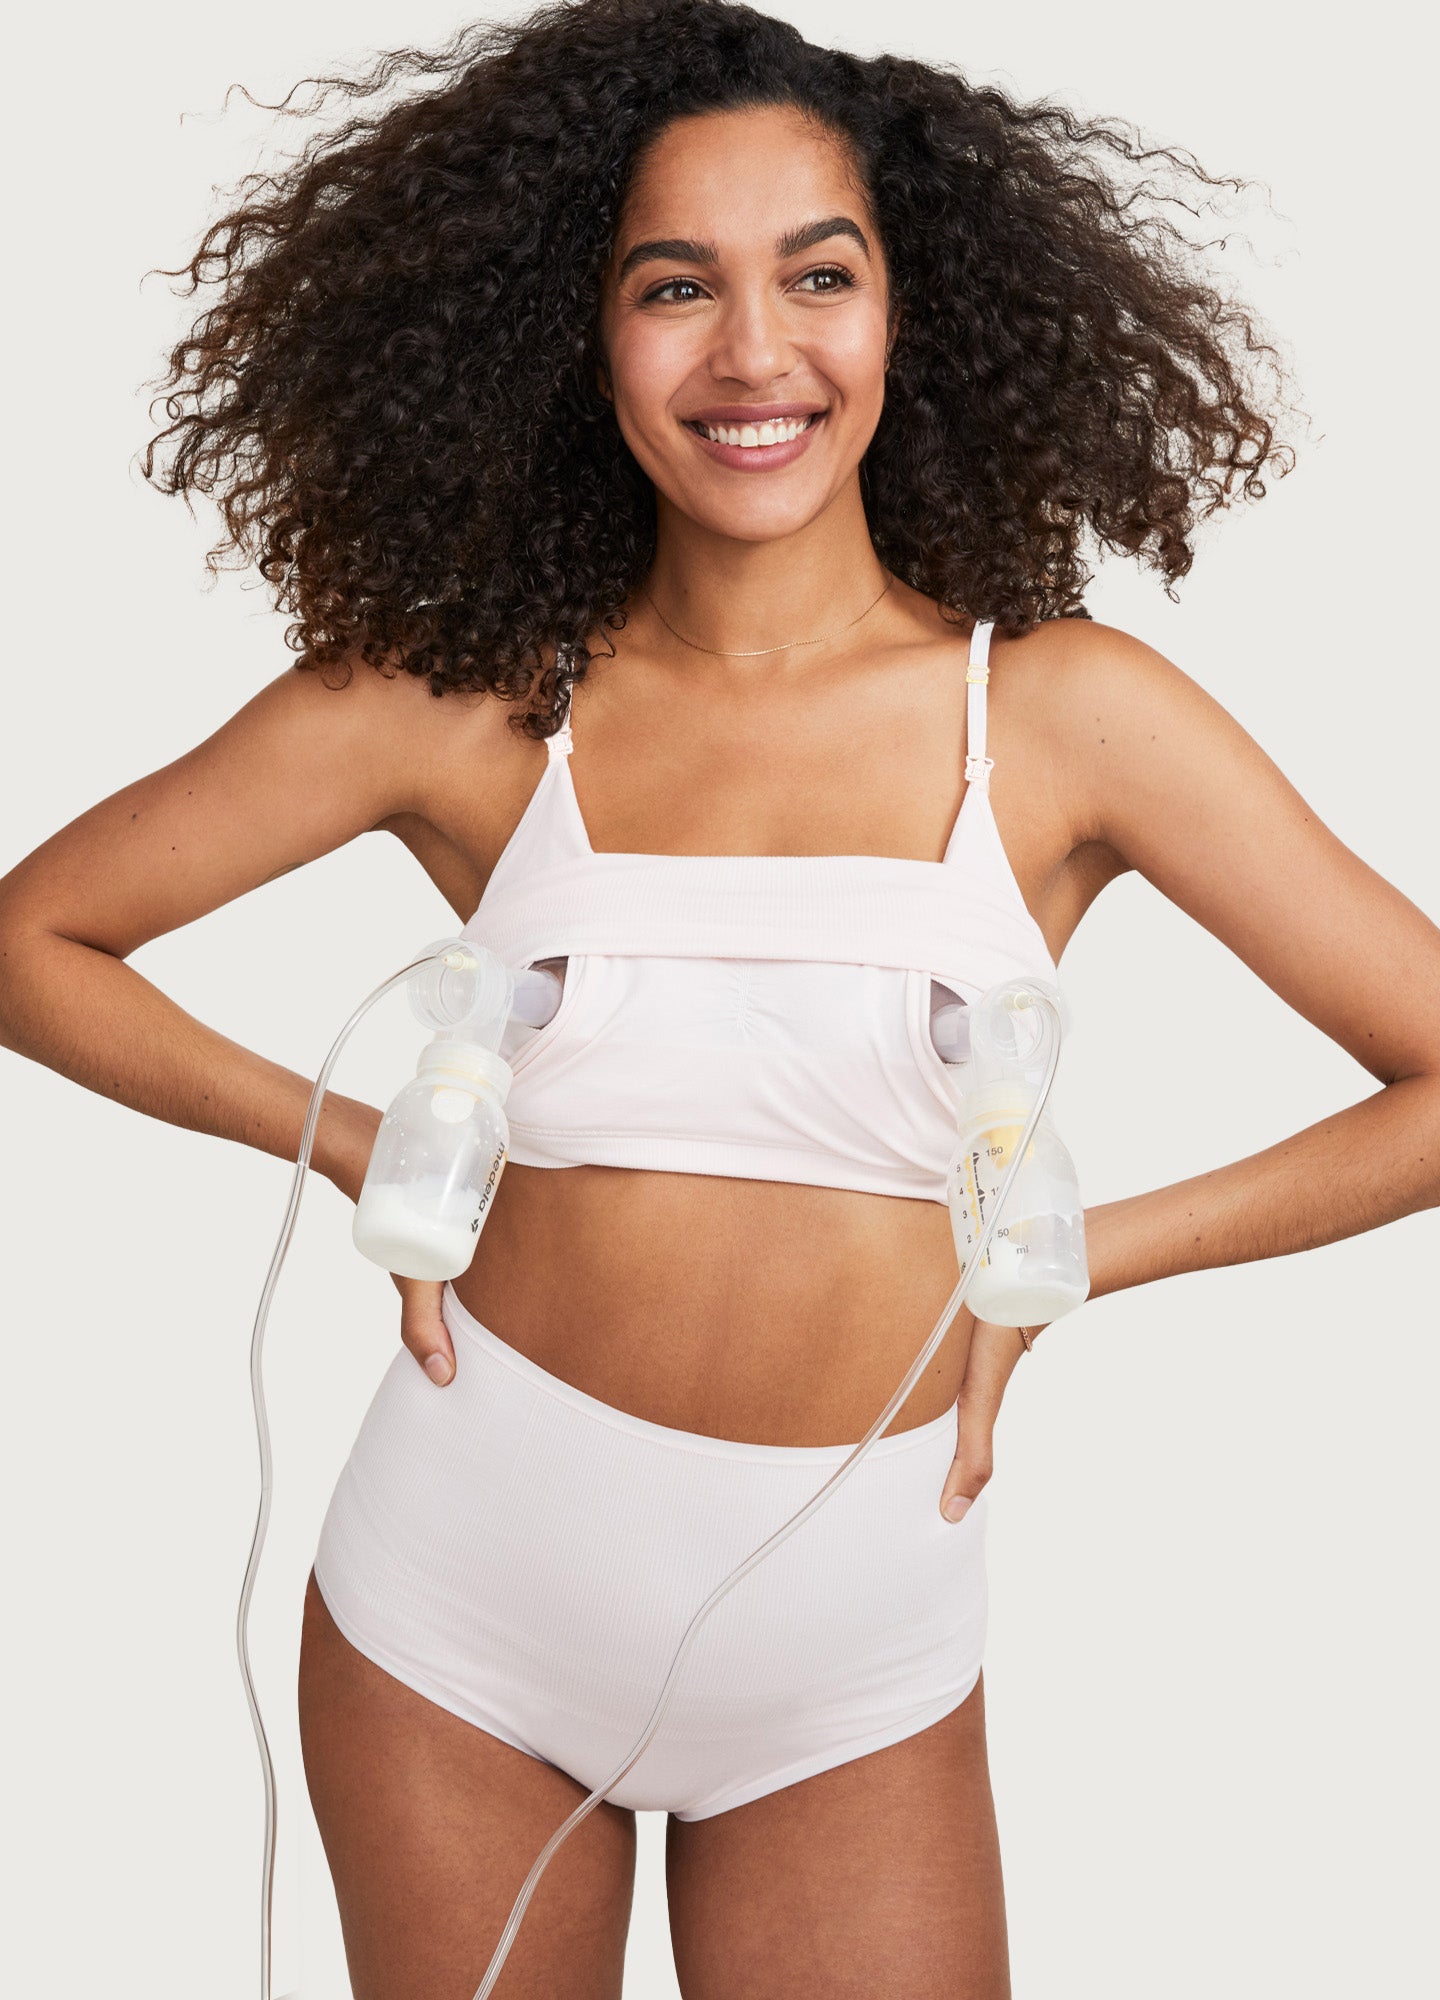 Wire-Free Nursing Bra and Panties Set - Maternity Clothes for